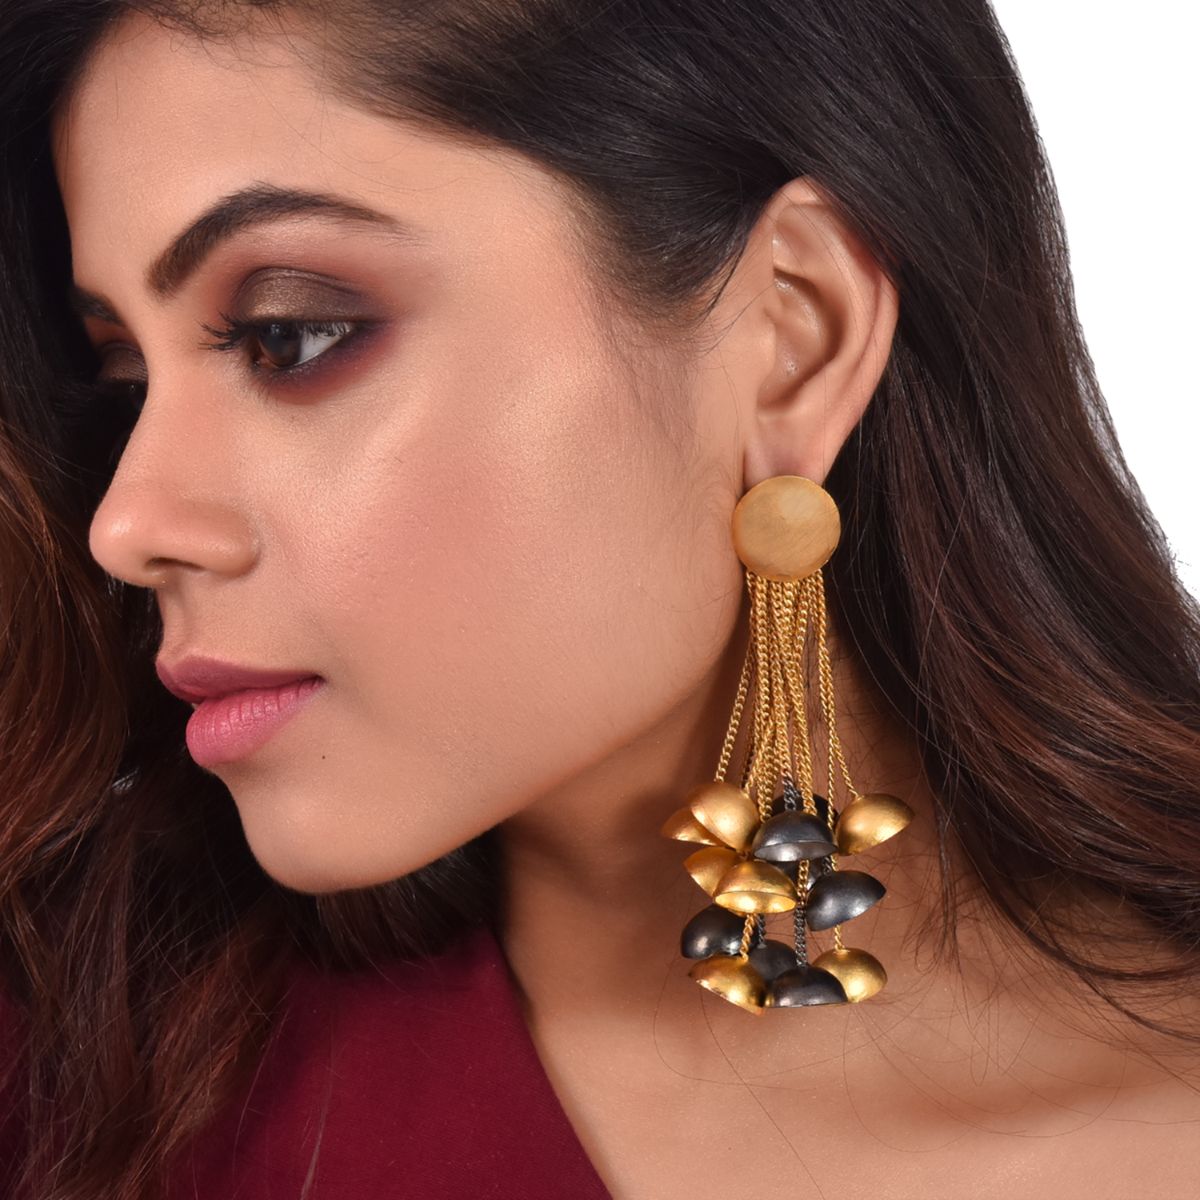 Exotic Earring for Lehenga Trend: Stylish and alluring